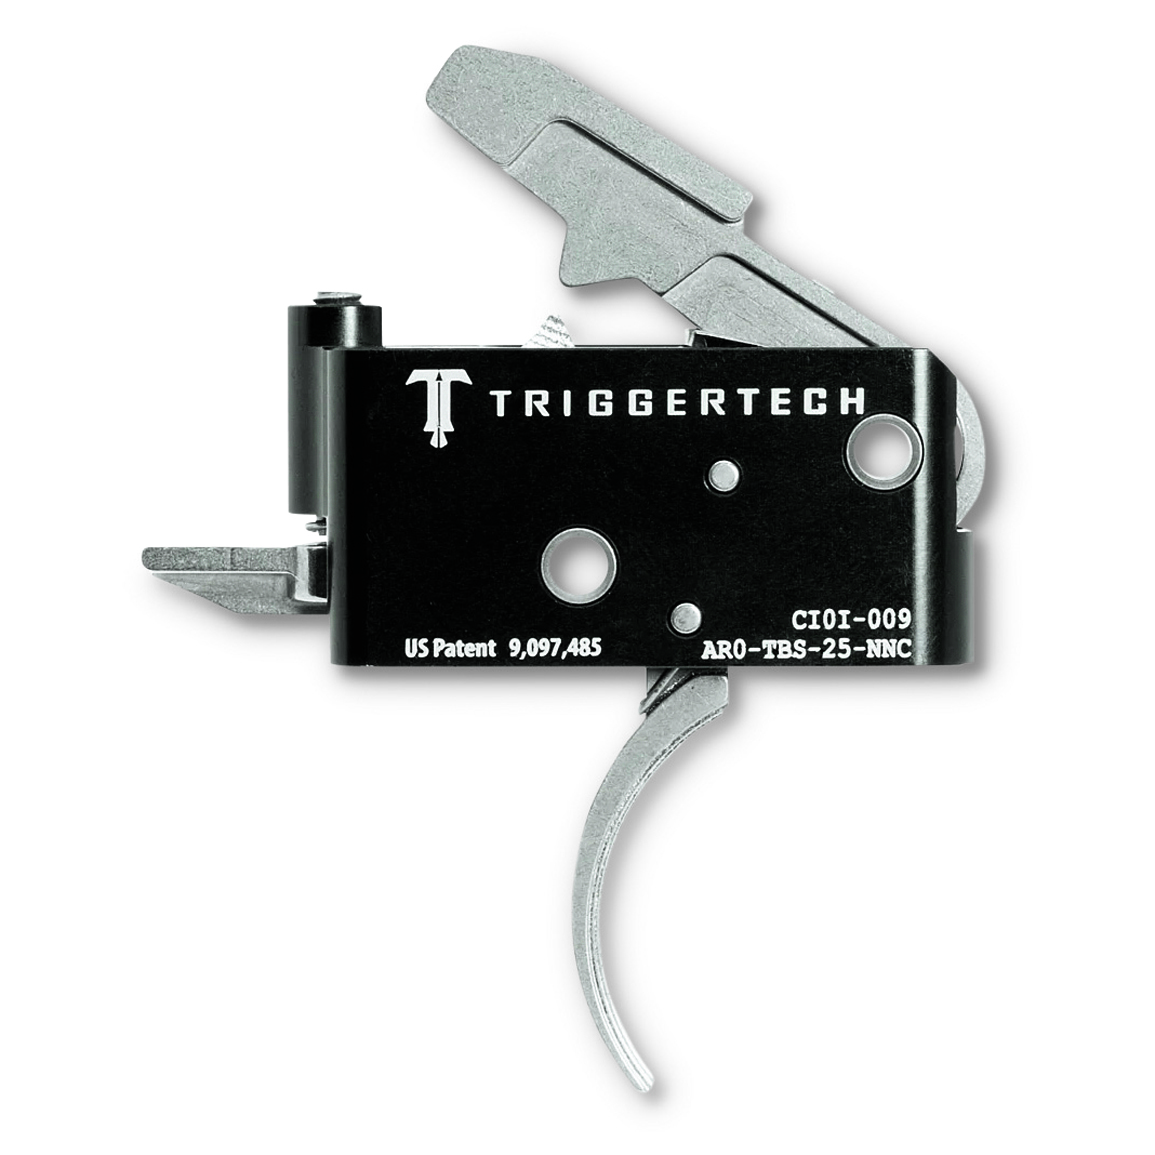 TriggerTech AR-15 Adaptable Single-Stage Curved Trigger, 2.5-5 lbs., Stainless